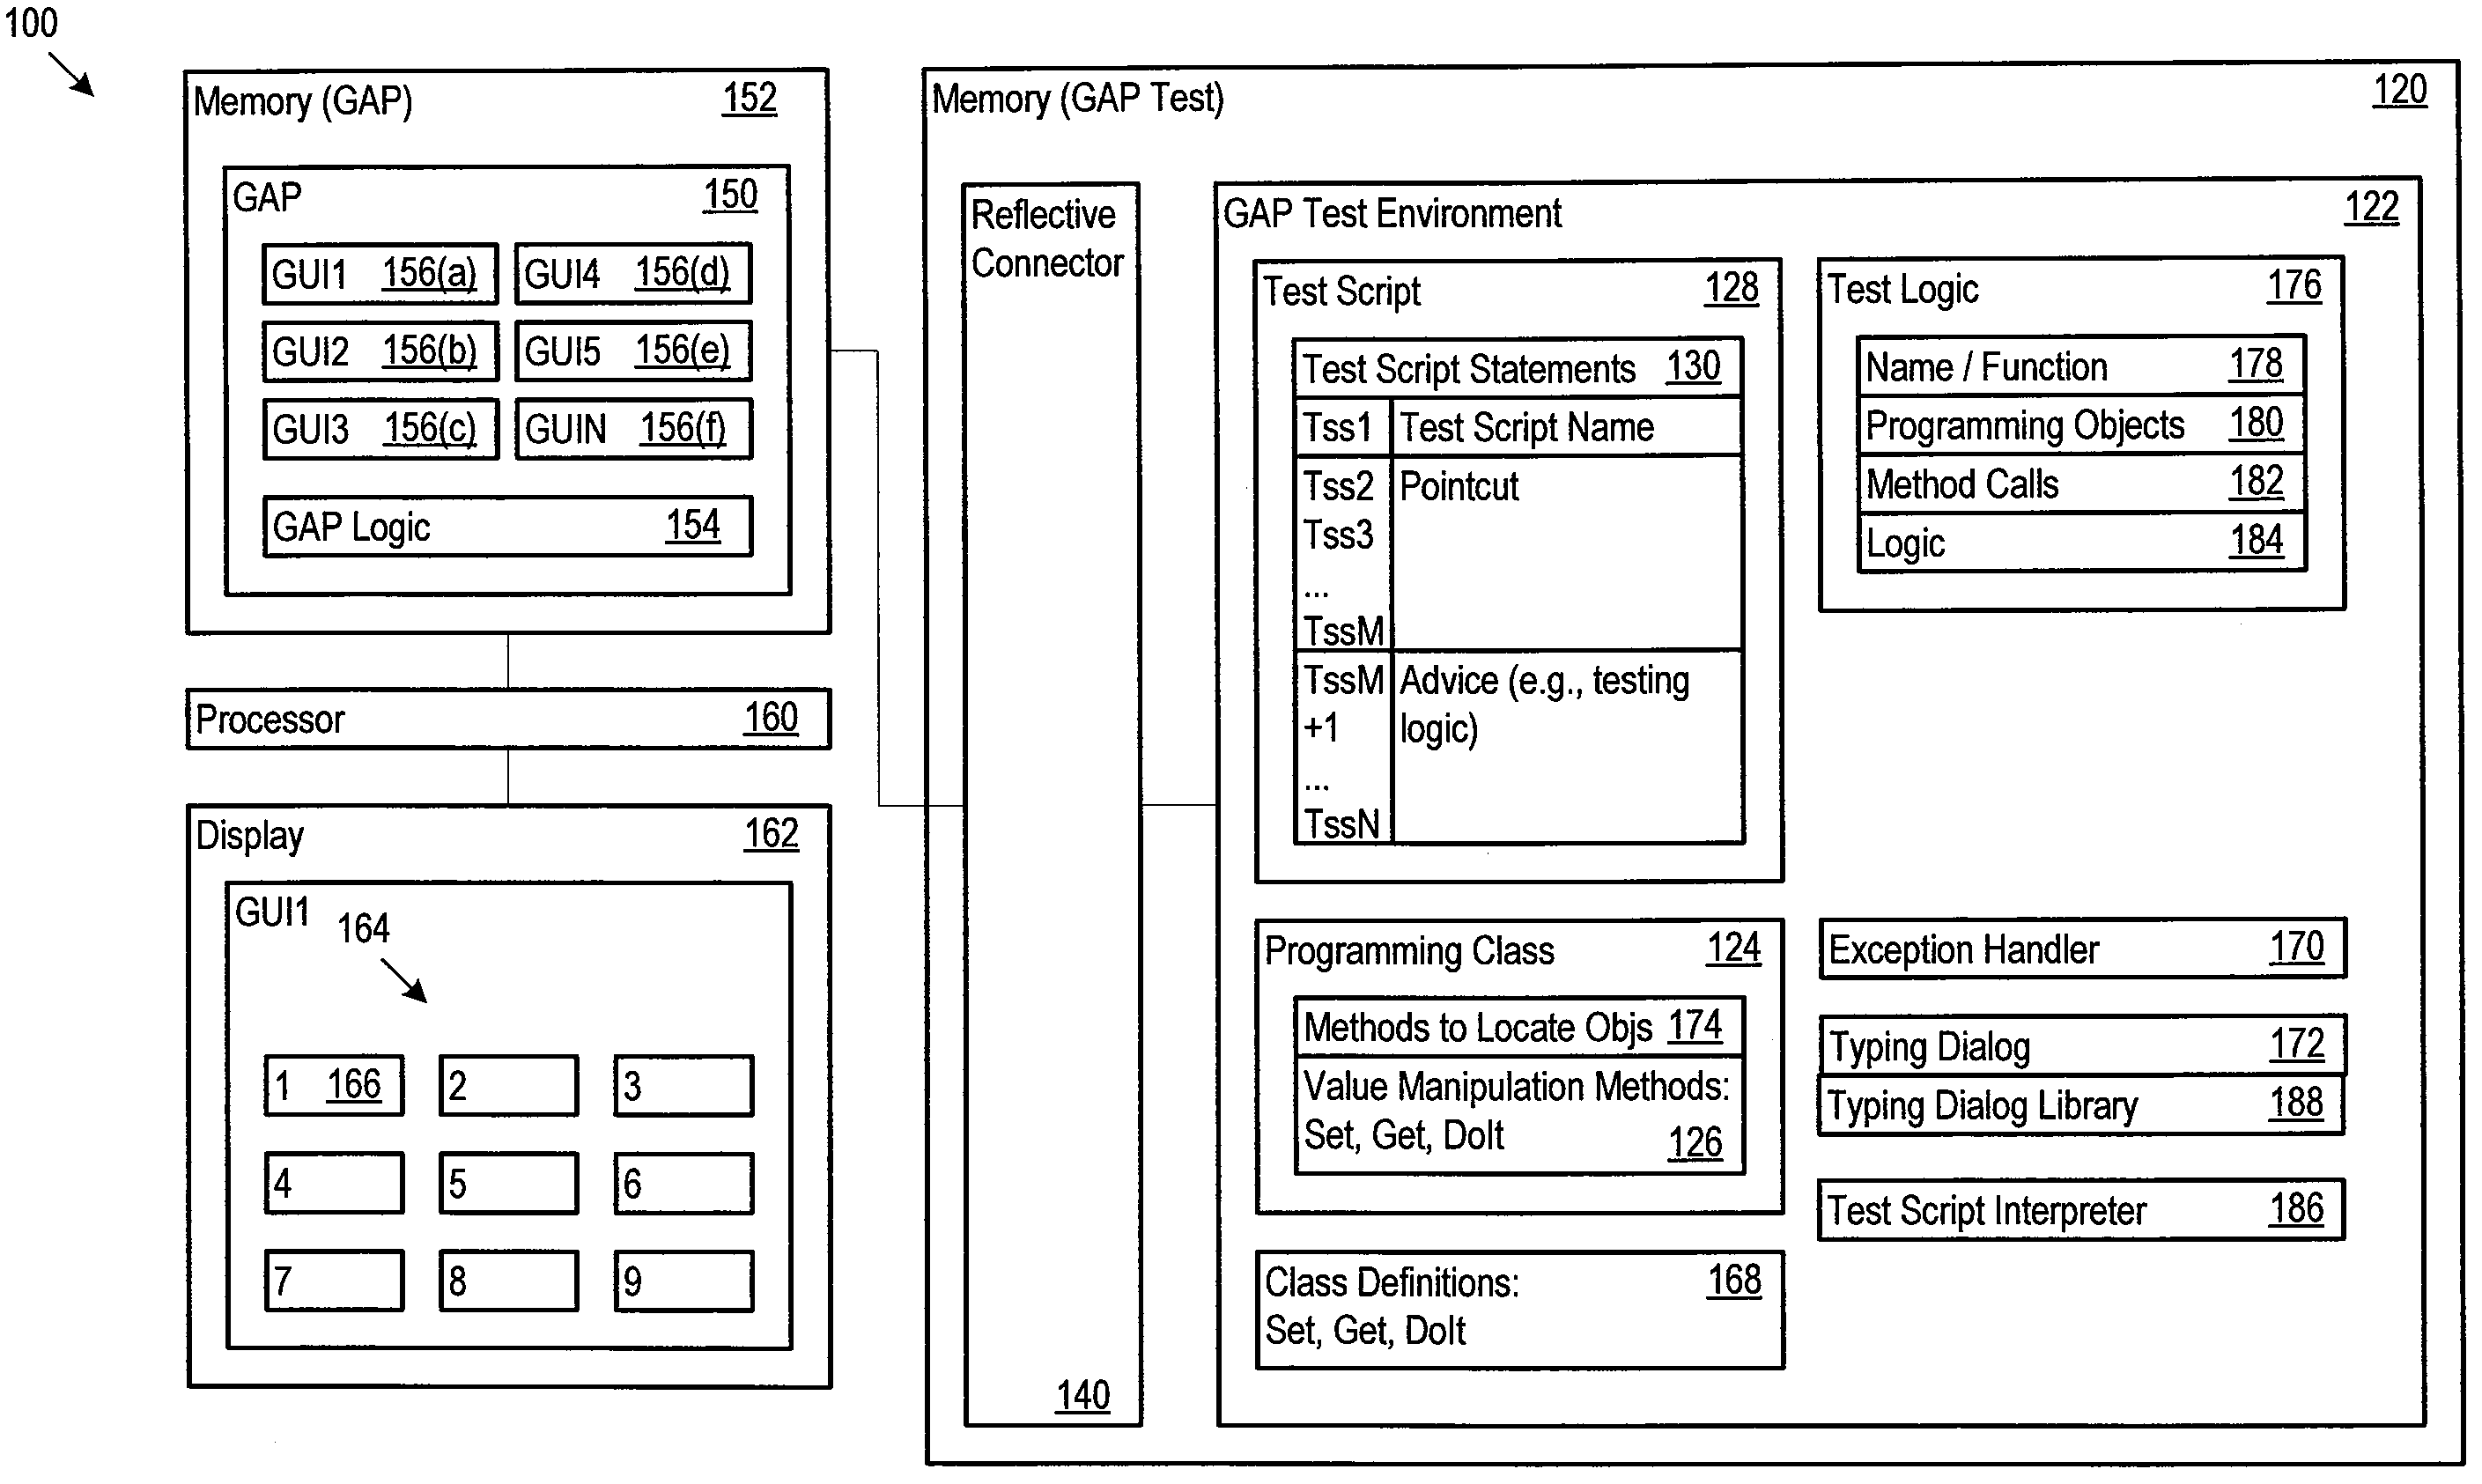 Modularizing and aspectizing graphical user interface directed test scripts